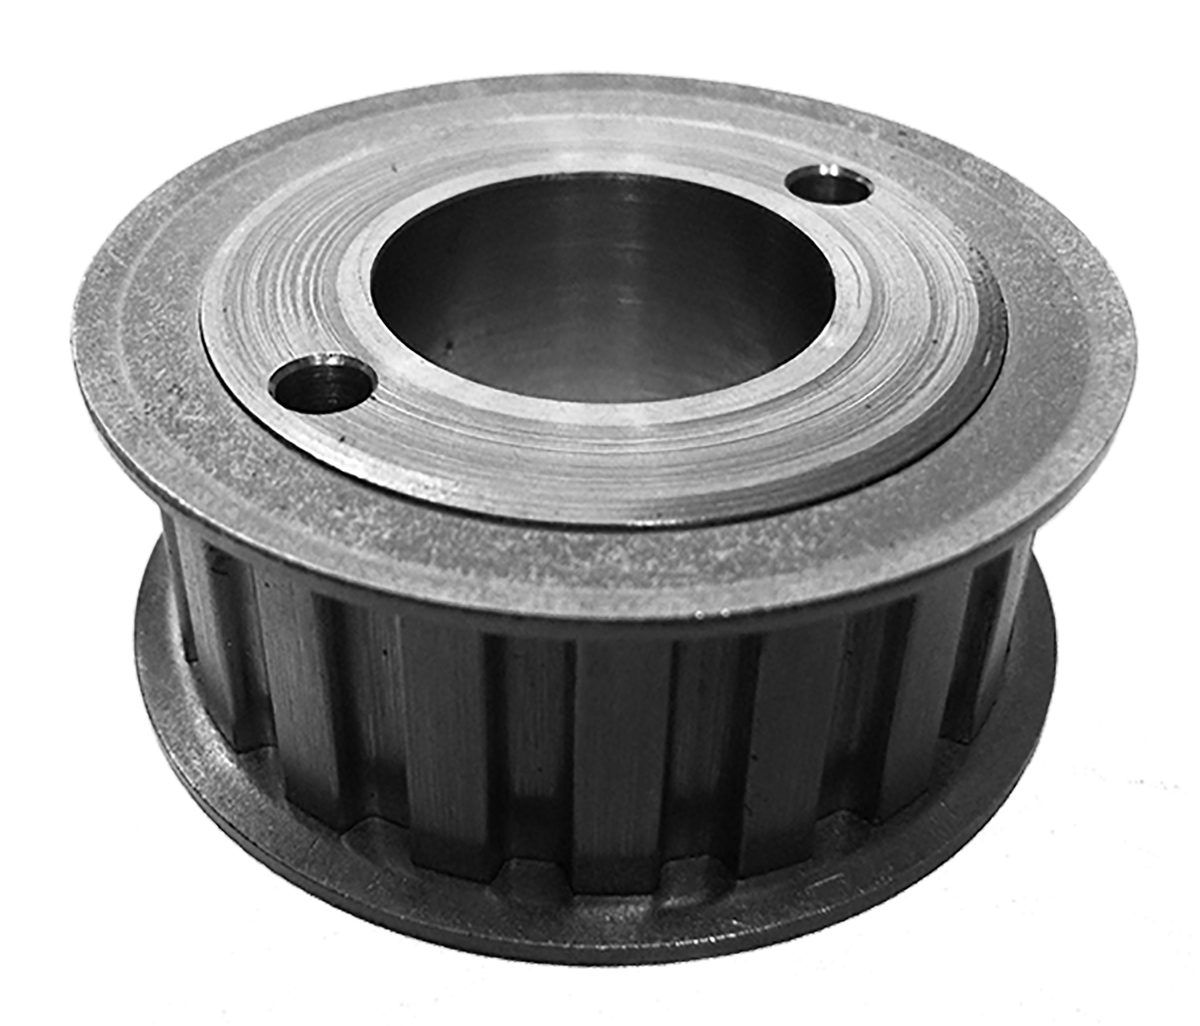 26LH075 - Cast Iron Imperial Pitch Pulleys